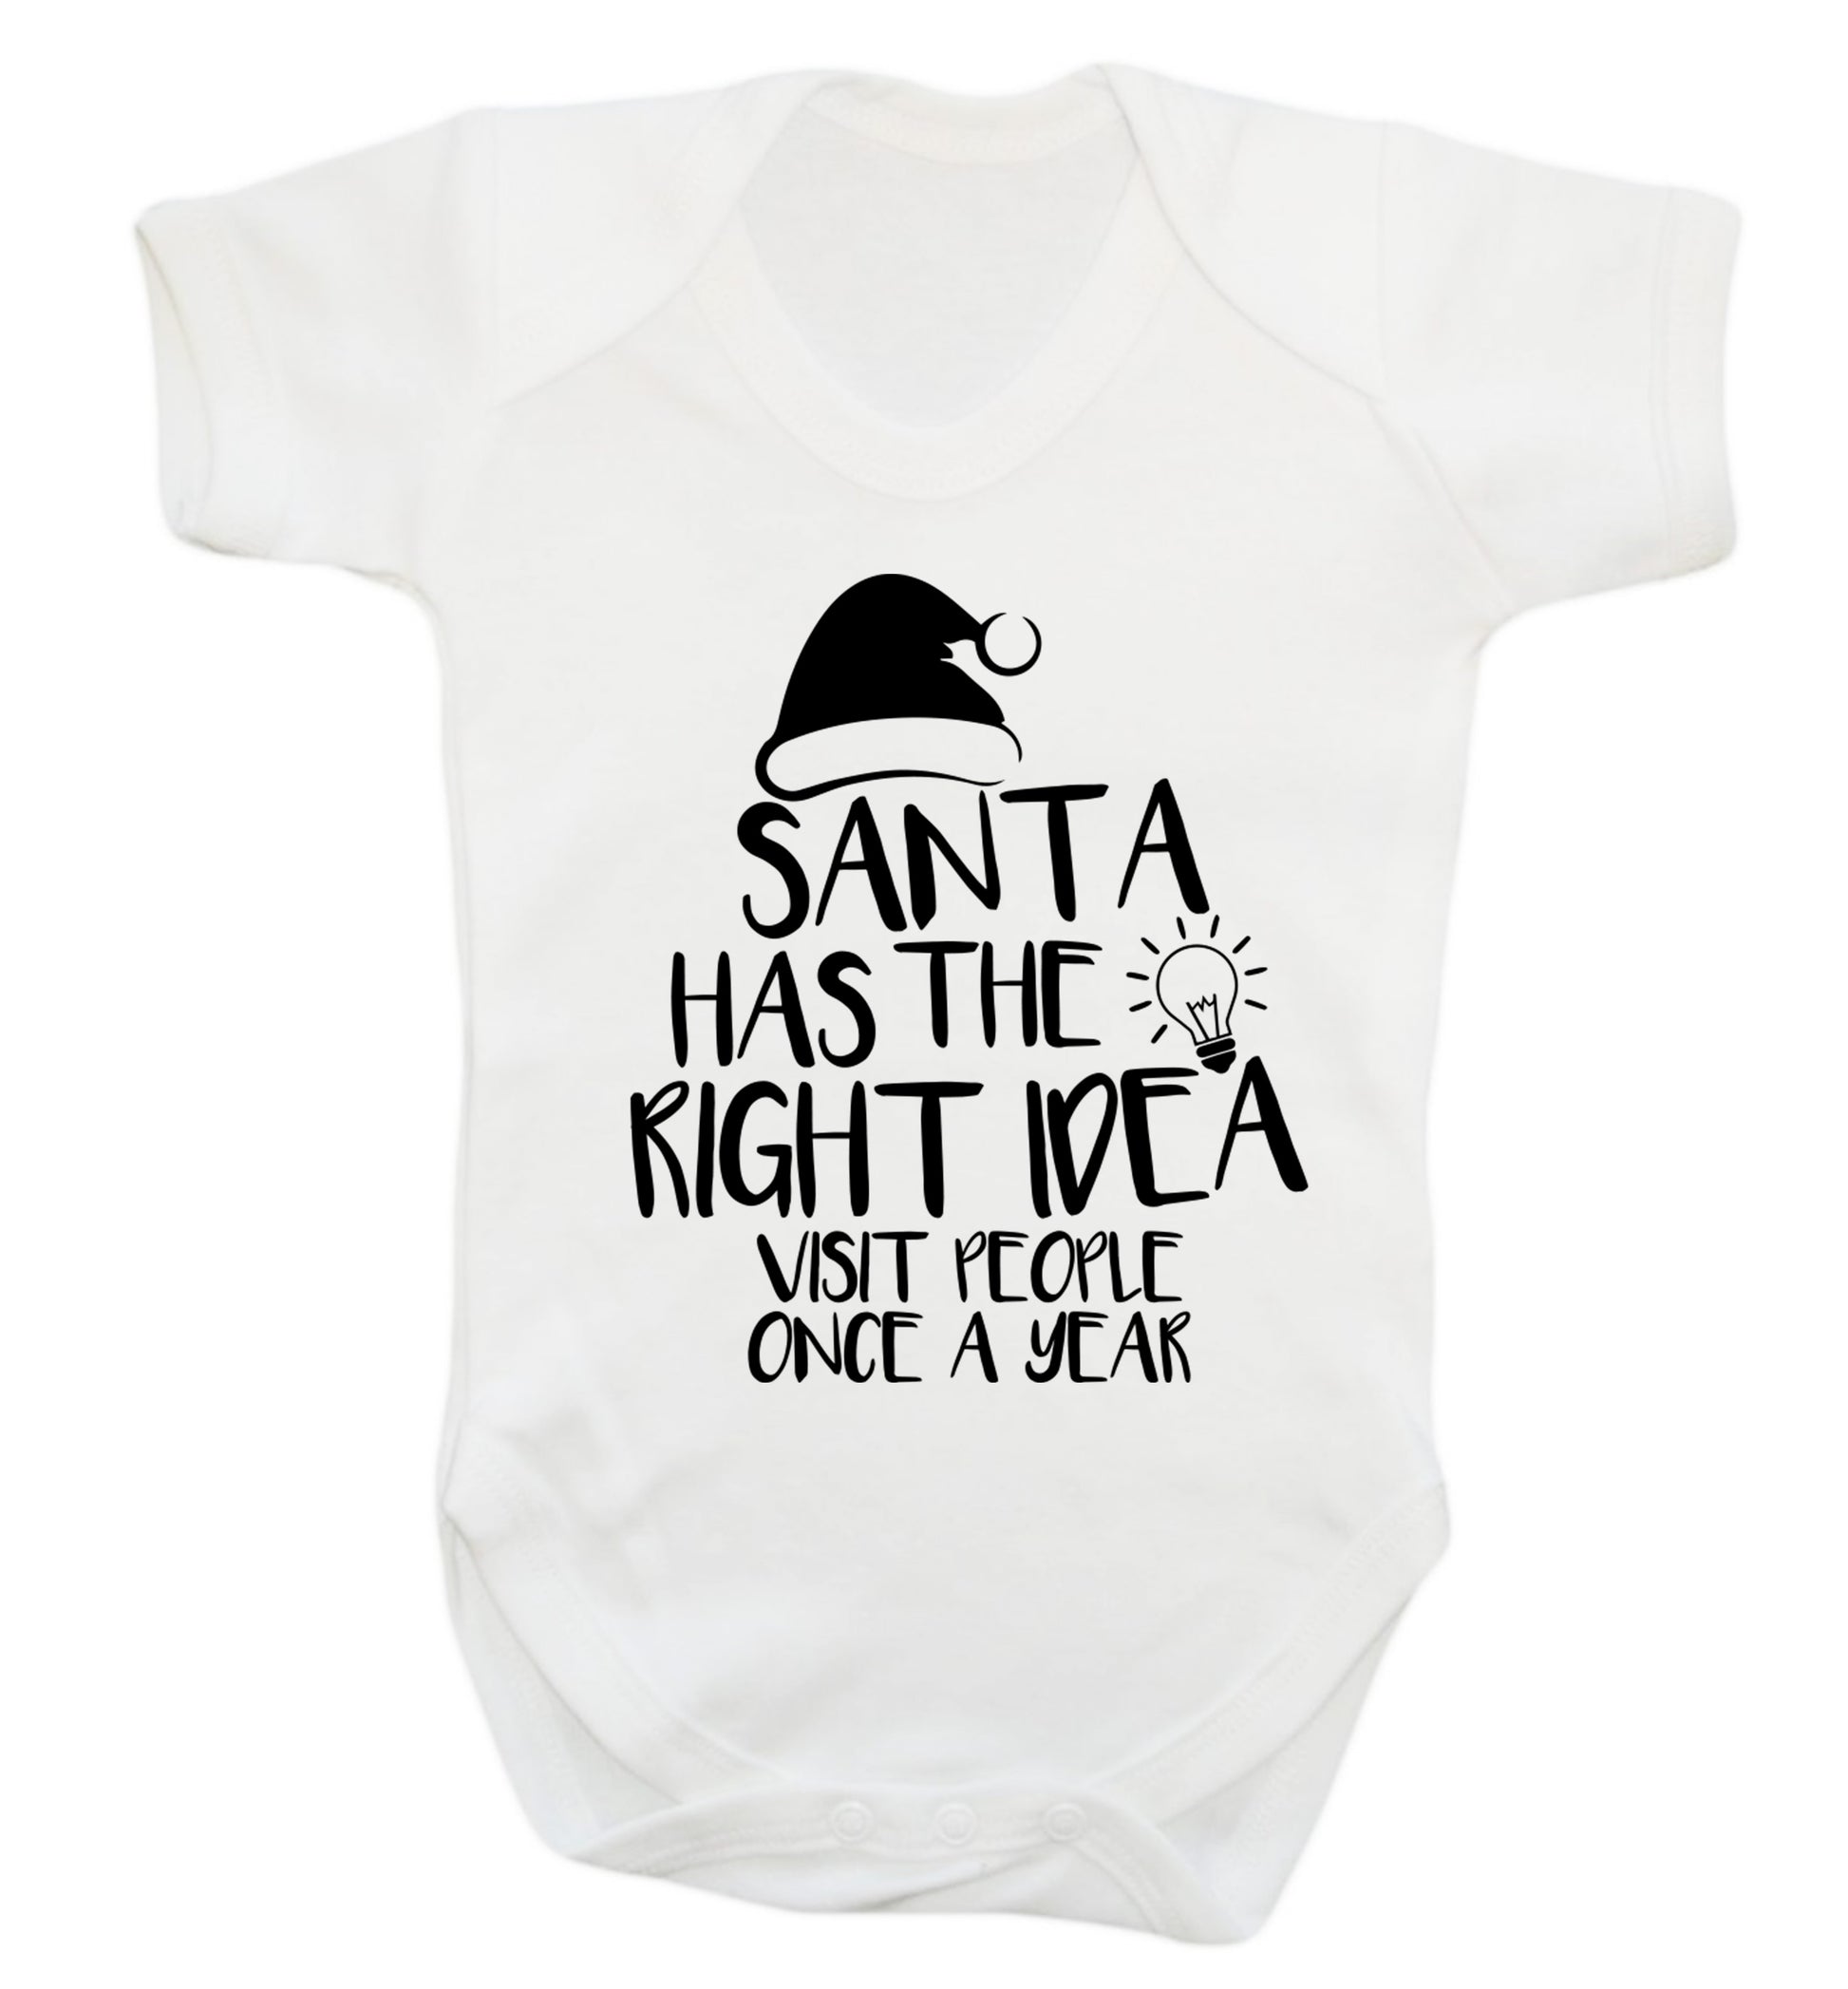 Santa has the right idea visit people once a year Baby Vest white 18-24 months